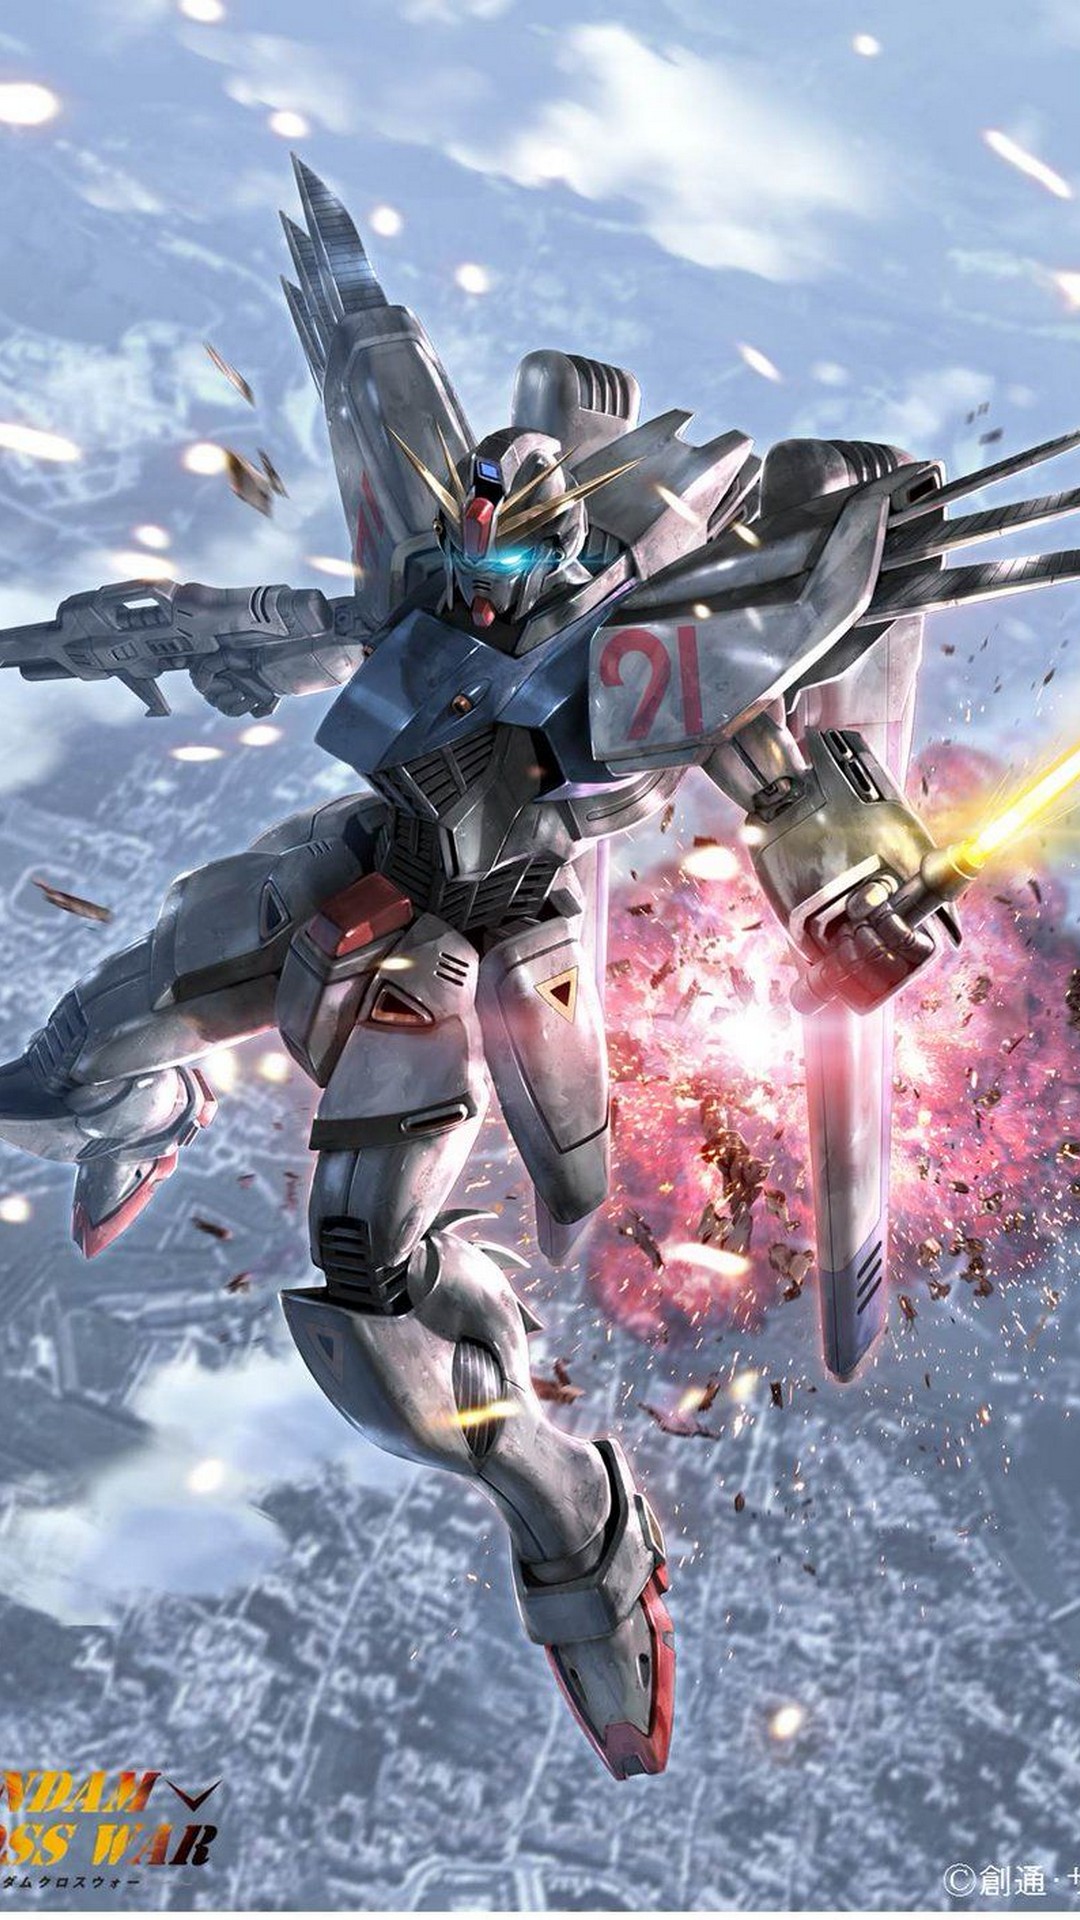 wallpaper phone android,action adventure game,mecha,cg artwork,fictional character,pc game